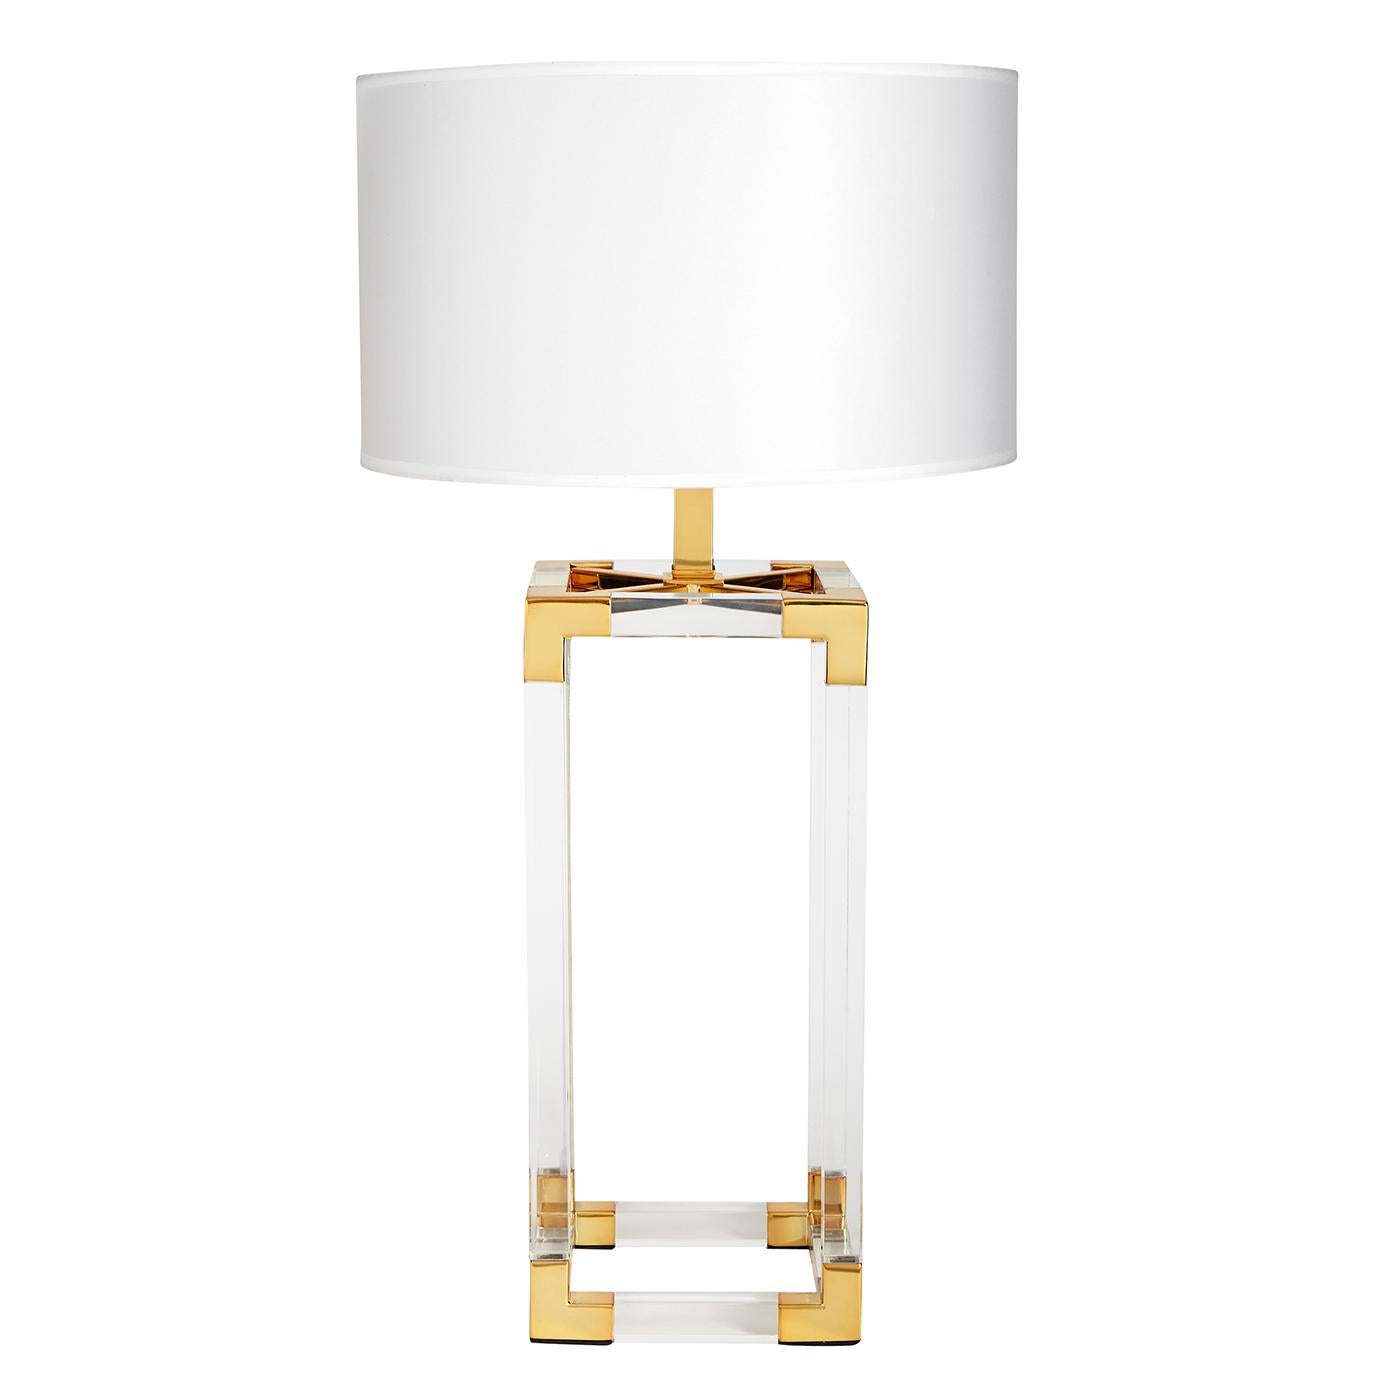 Clearly cool. The perfect blend of simplicity and glamour, modern and traditional. Our Jacques column table lamp features crystal clear acrylic framework with brushed brass corners topped with a silky white shade. Add some pop to your penthouse or